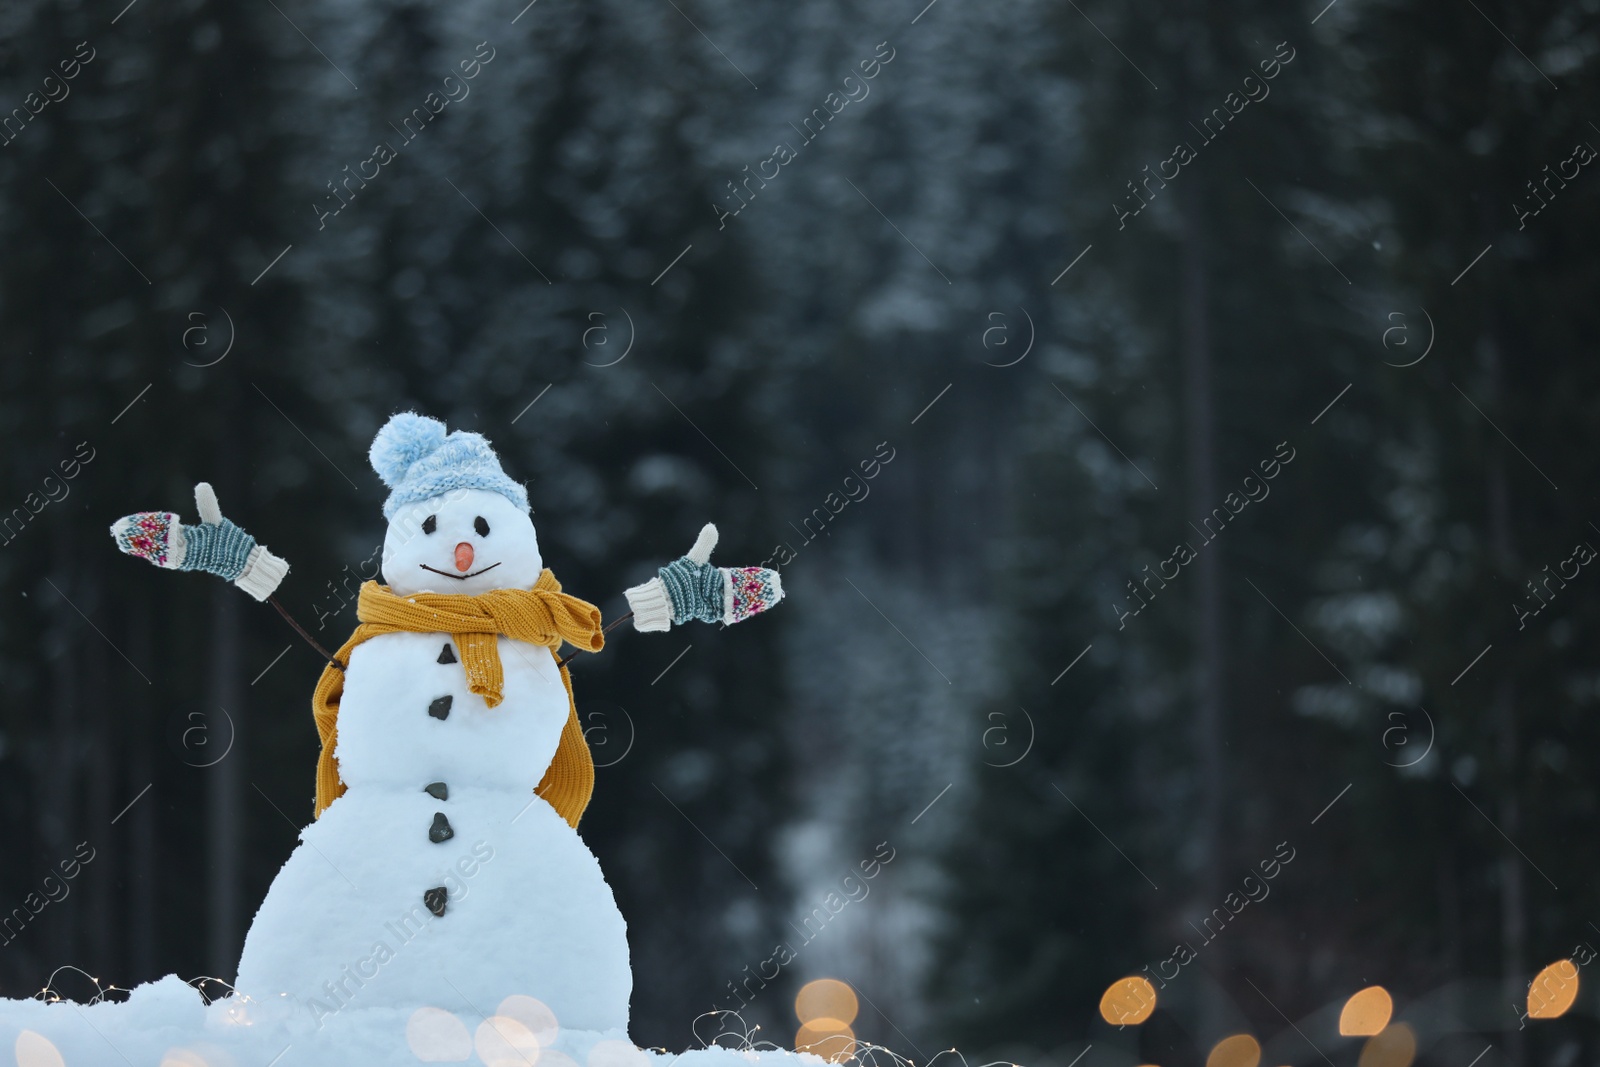 Photo of Adorable smiling snowman with Christmas lights outdoors on winter day. Space for text